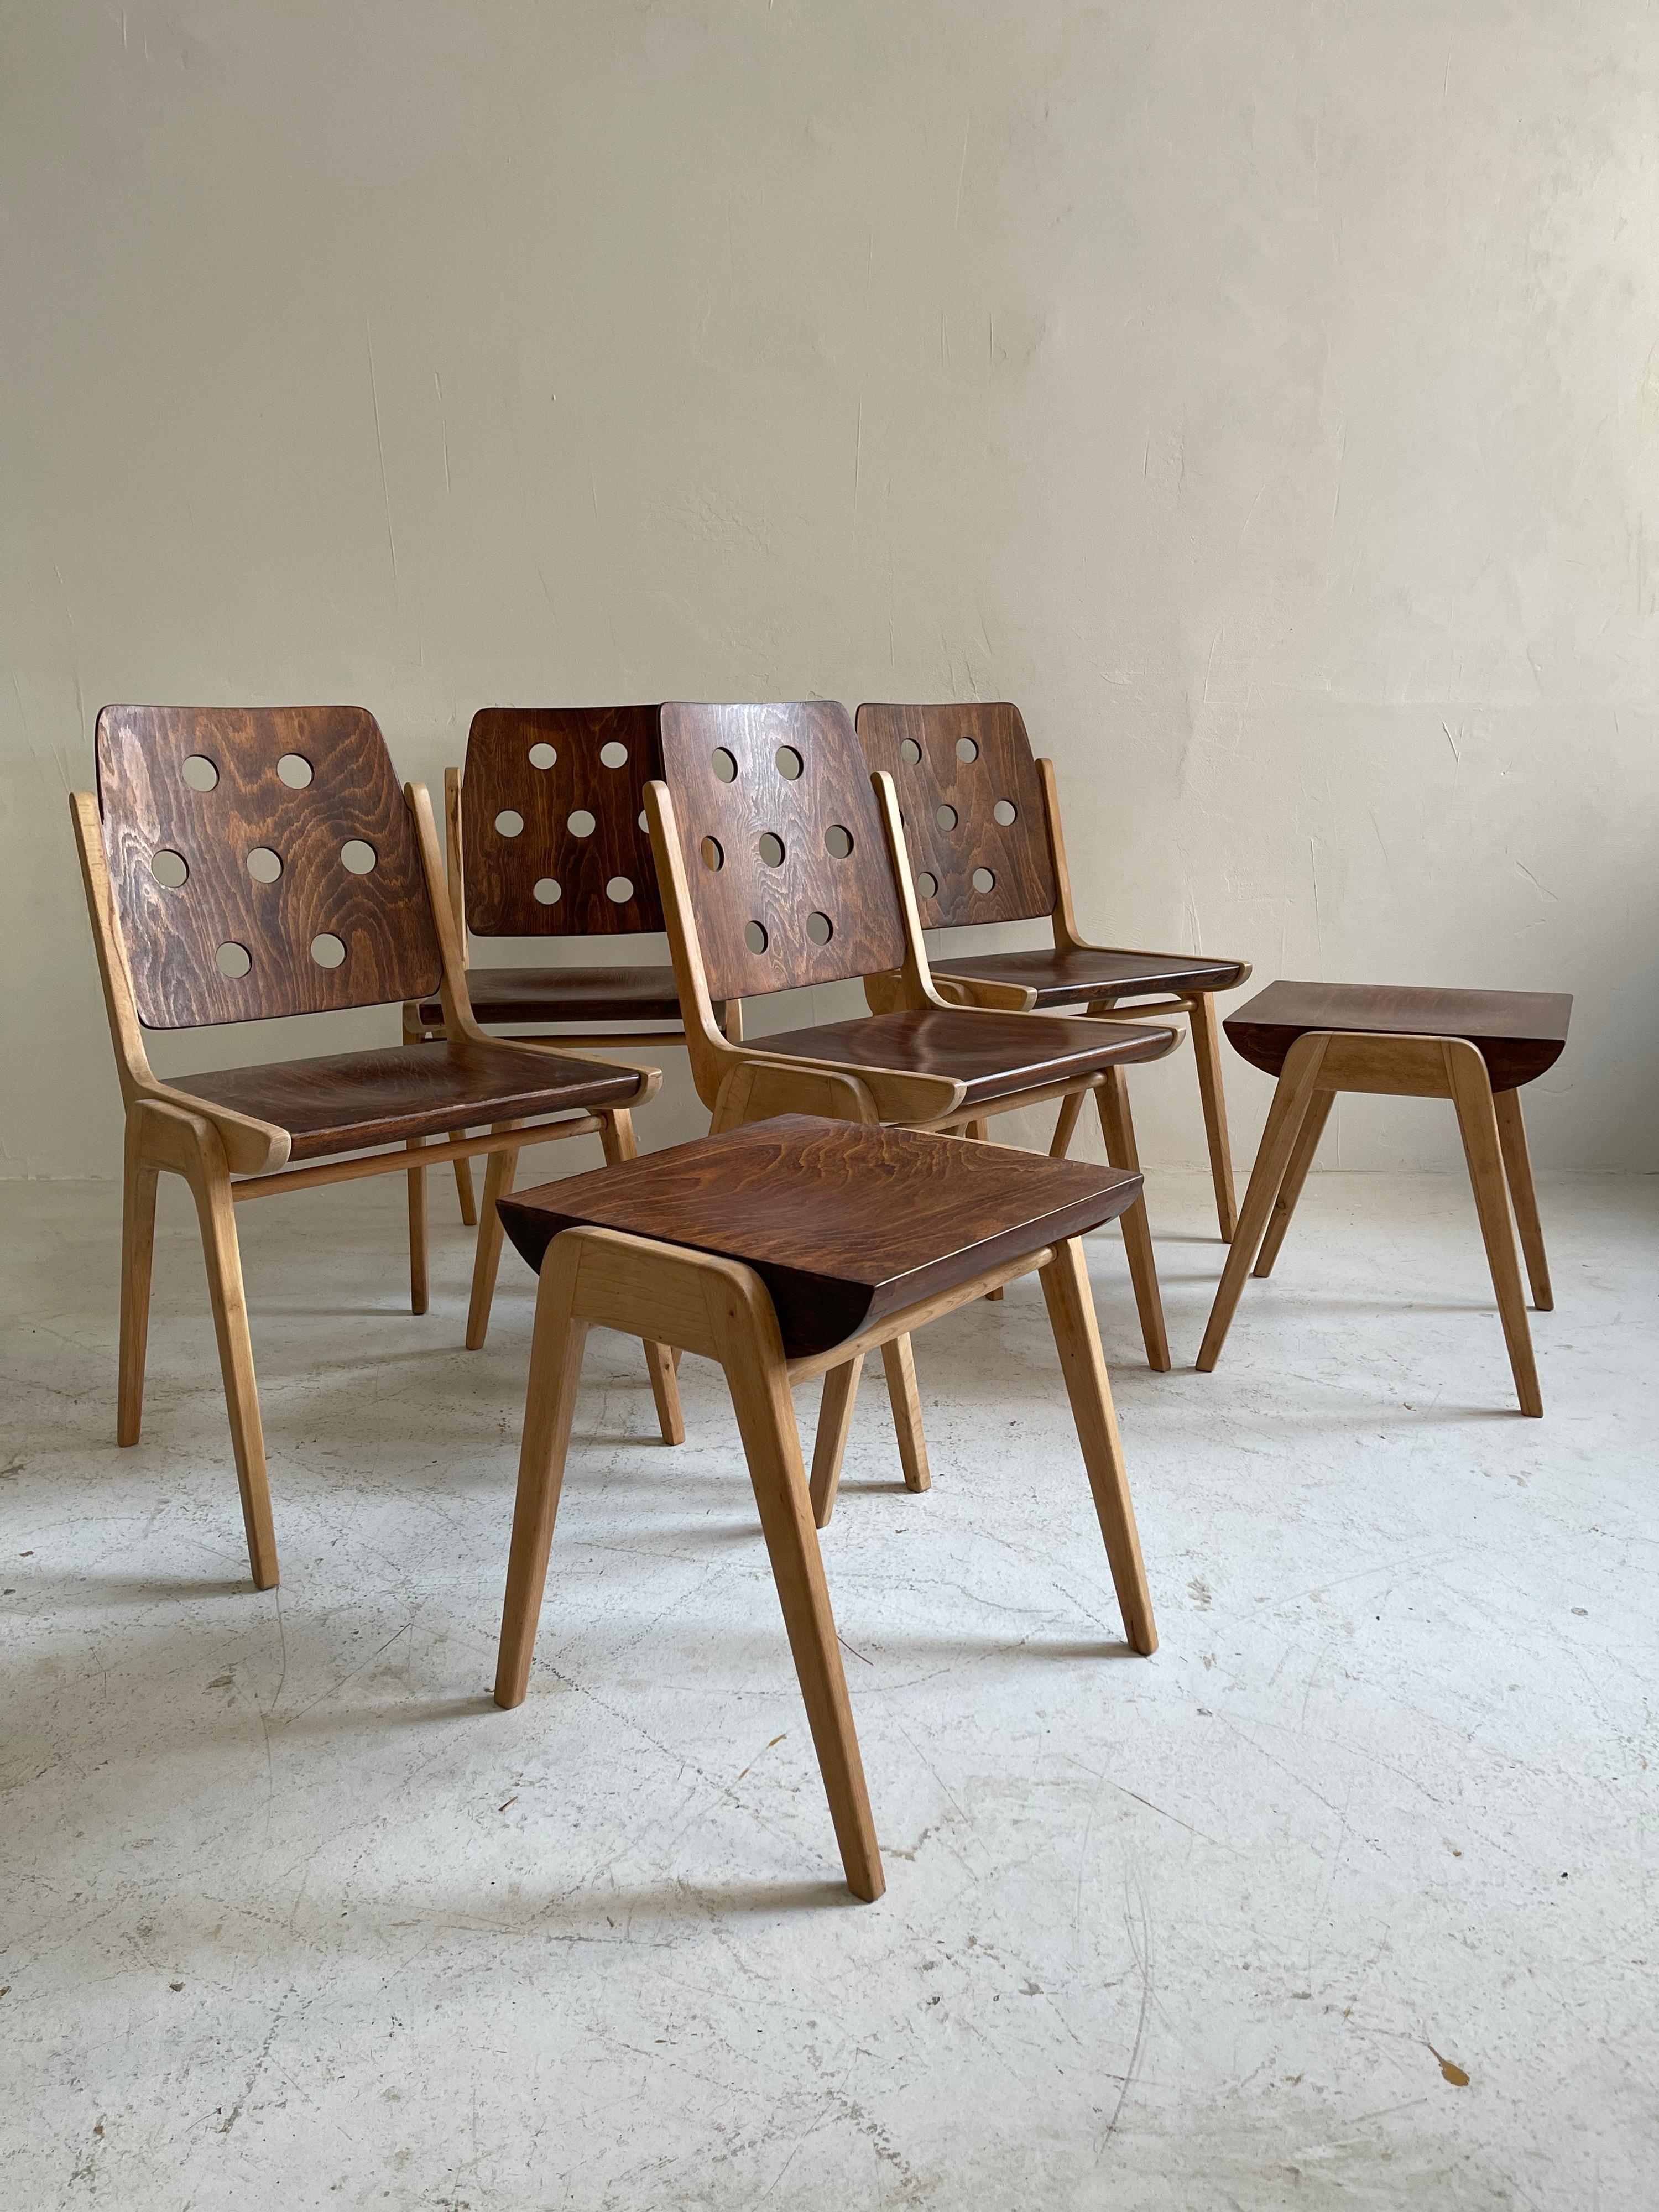 Franz Schuster Model 'Maestro' Dining Room Chairs & Stools, Austria, 1950s For Sale 1